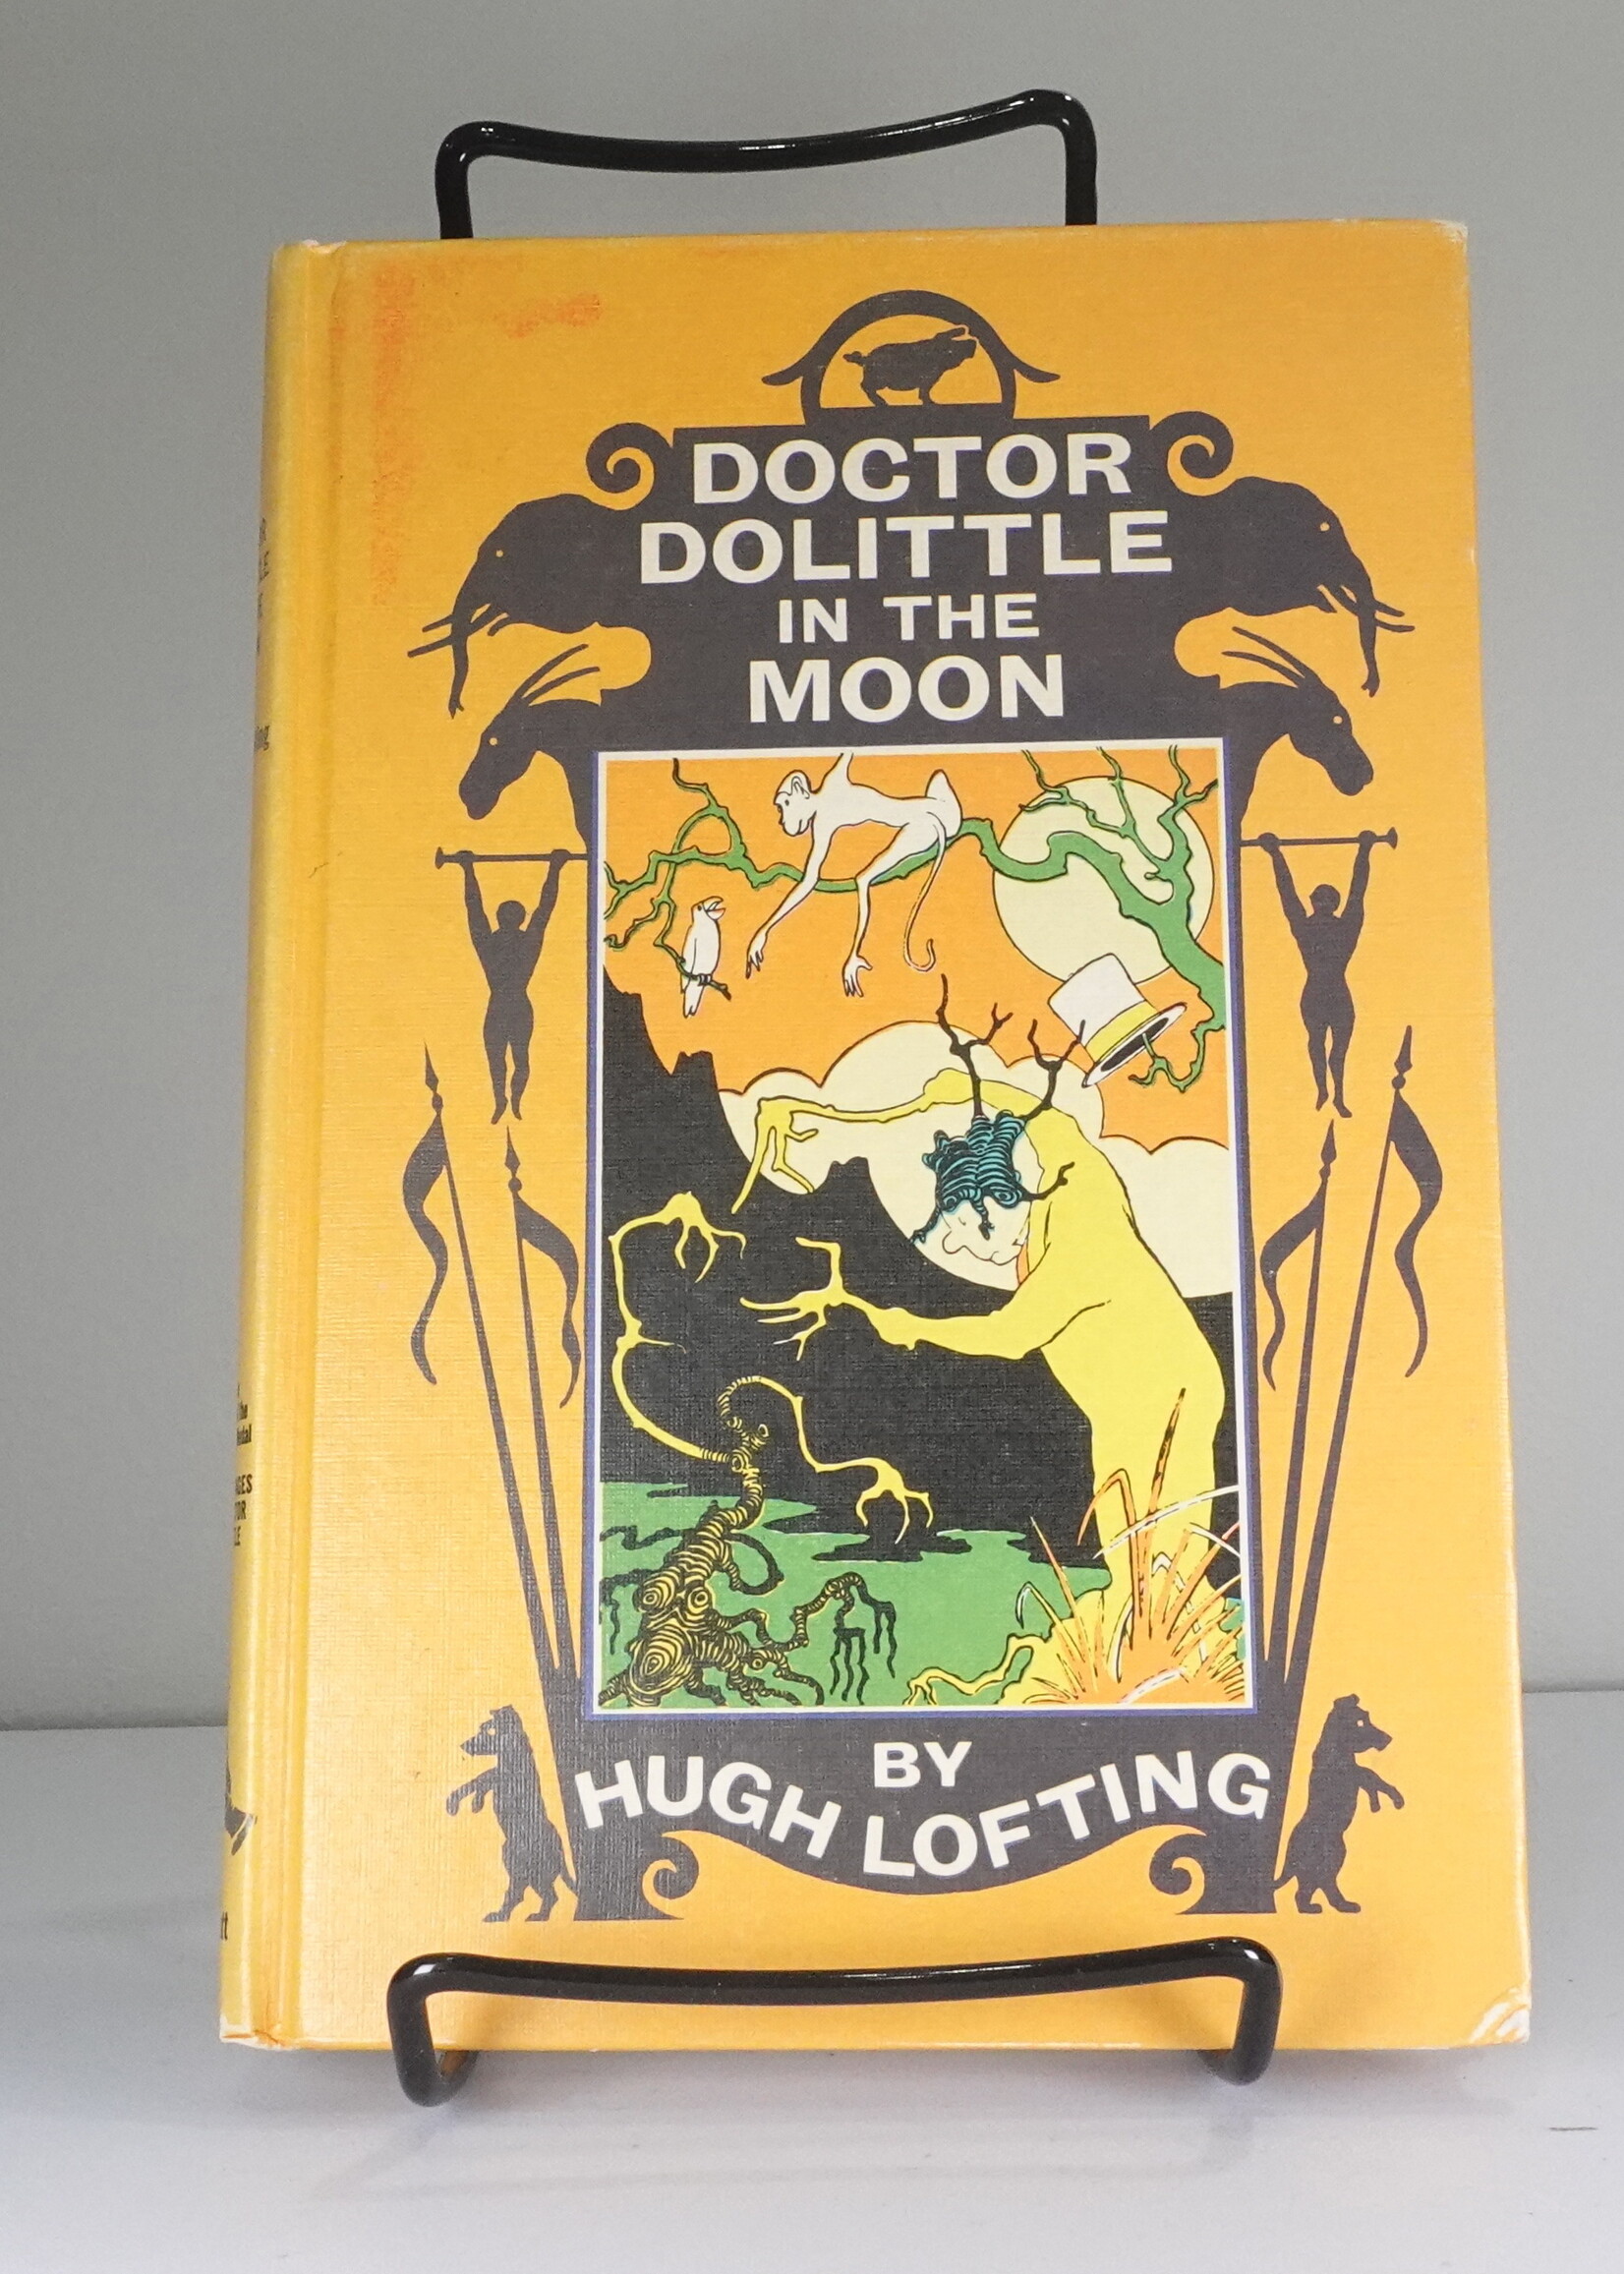 Doctor Dolittle in the Moon